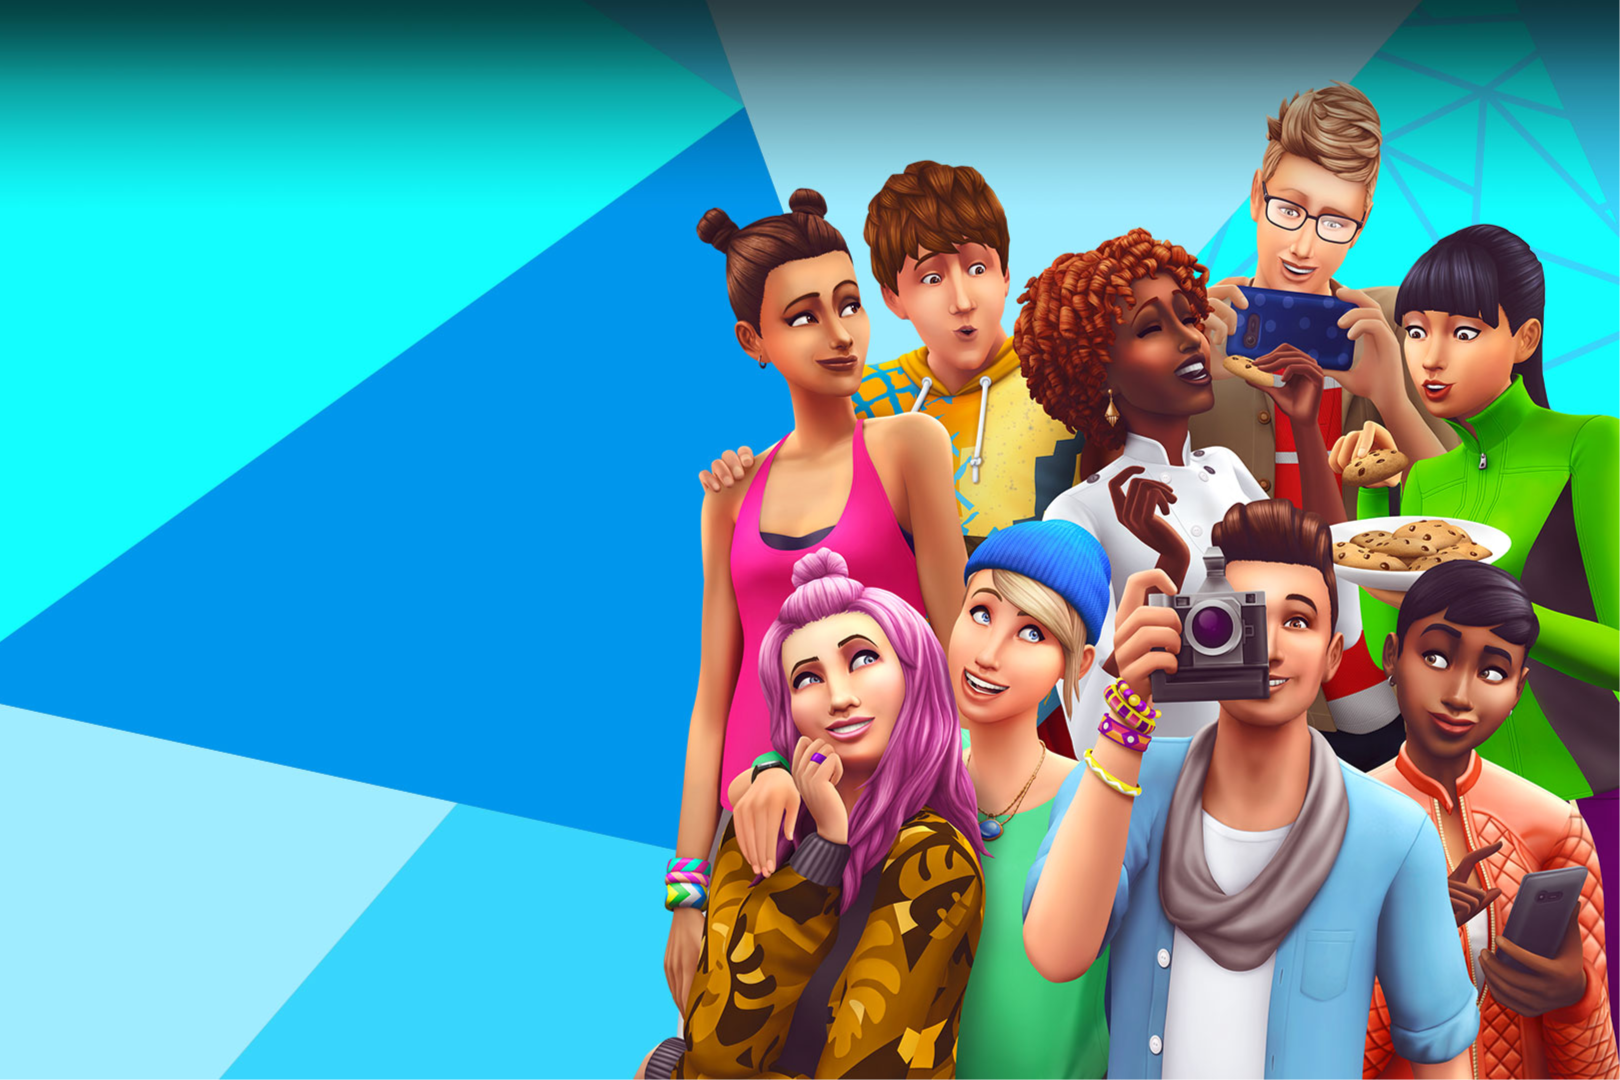 The Sims Trivia Quiz: Can You Name The Sims Townie?